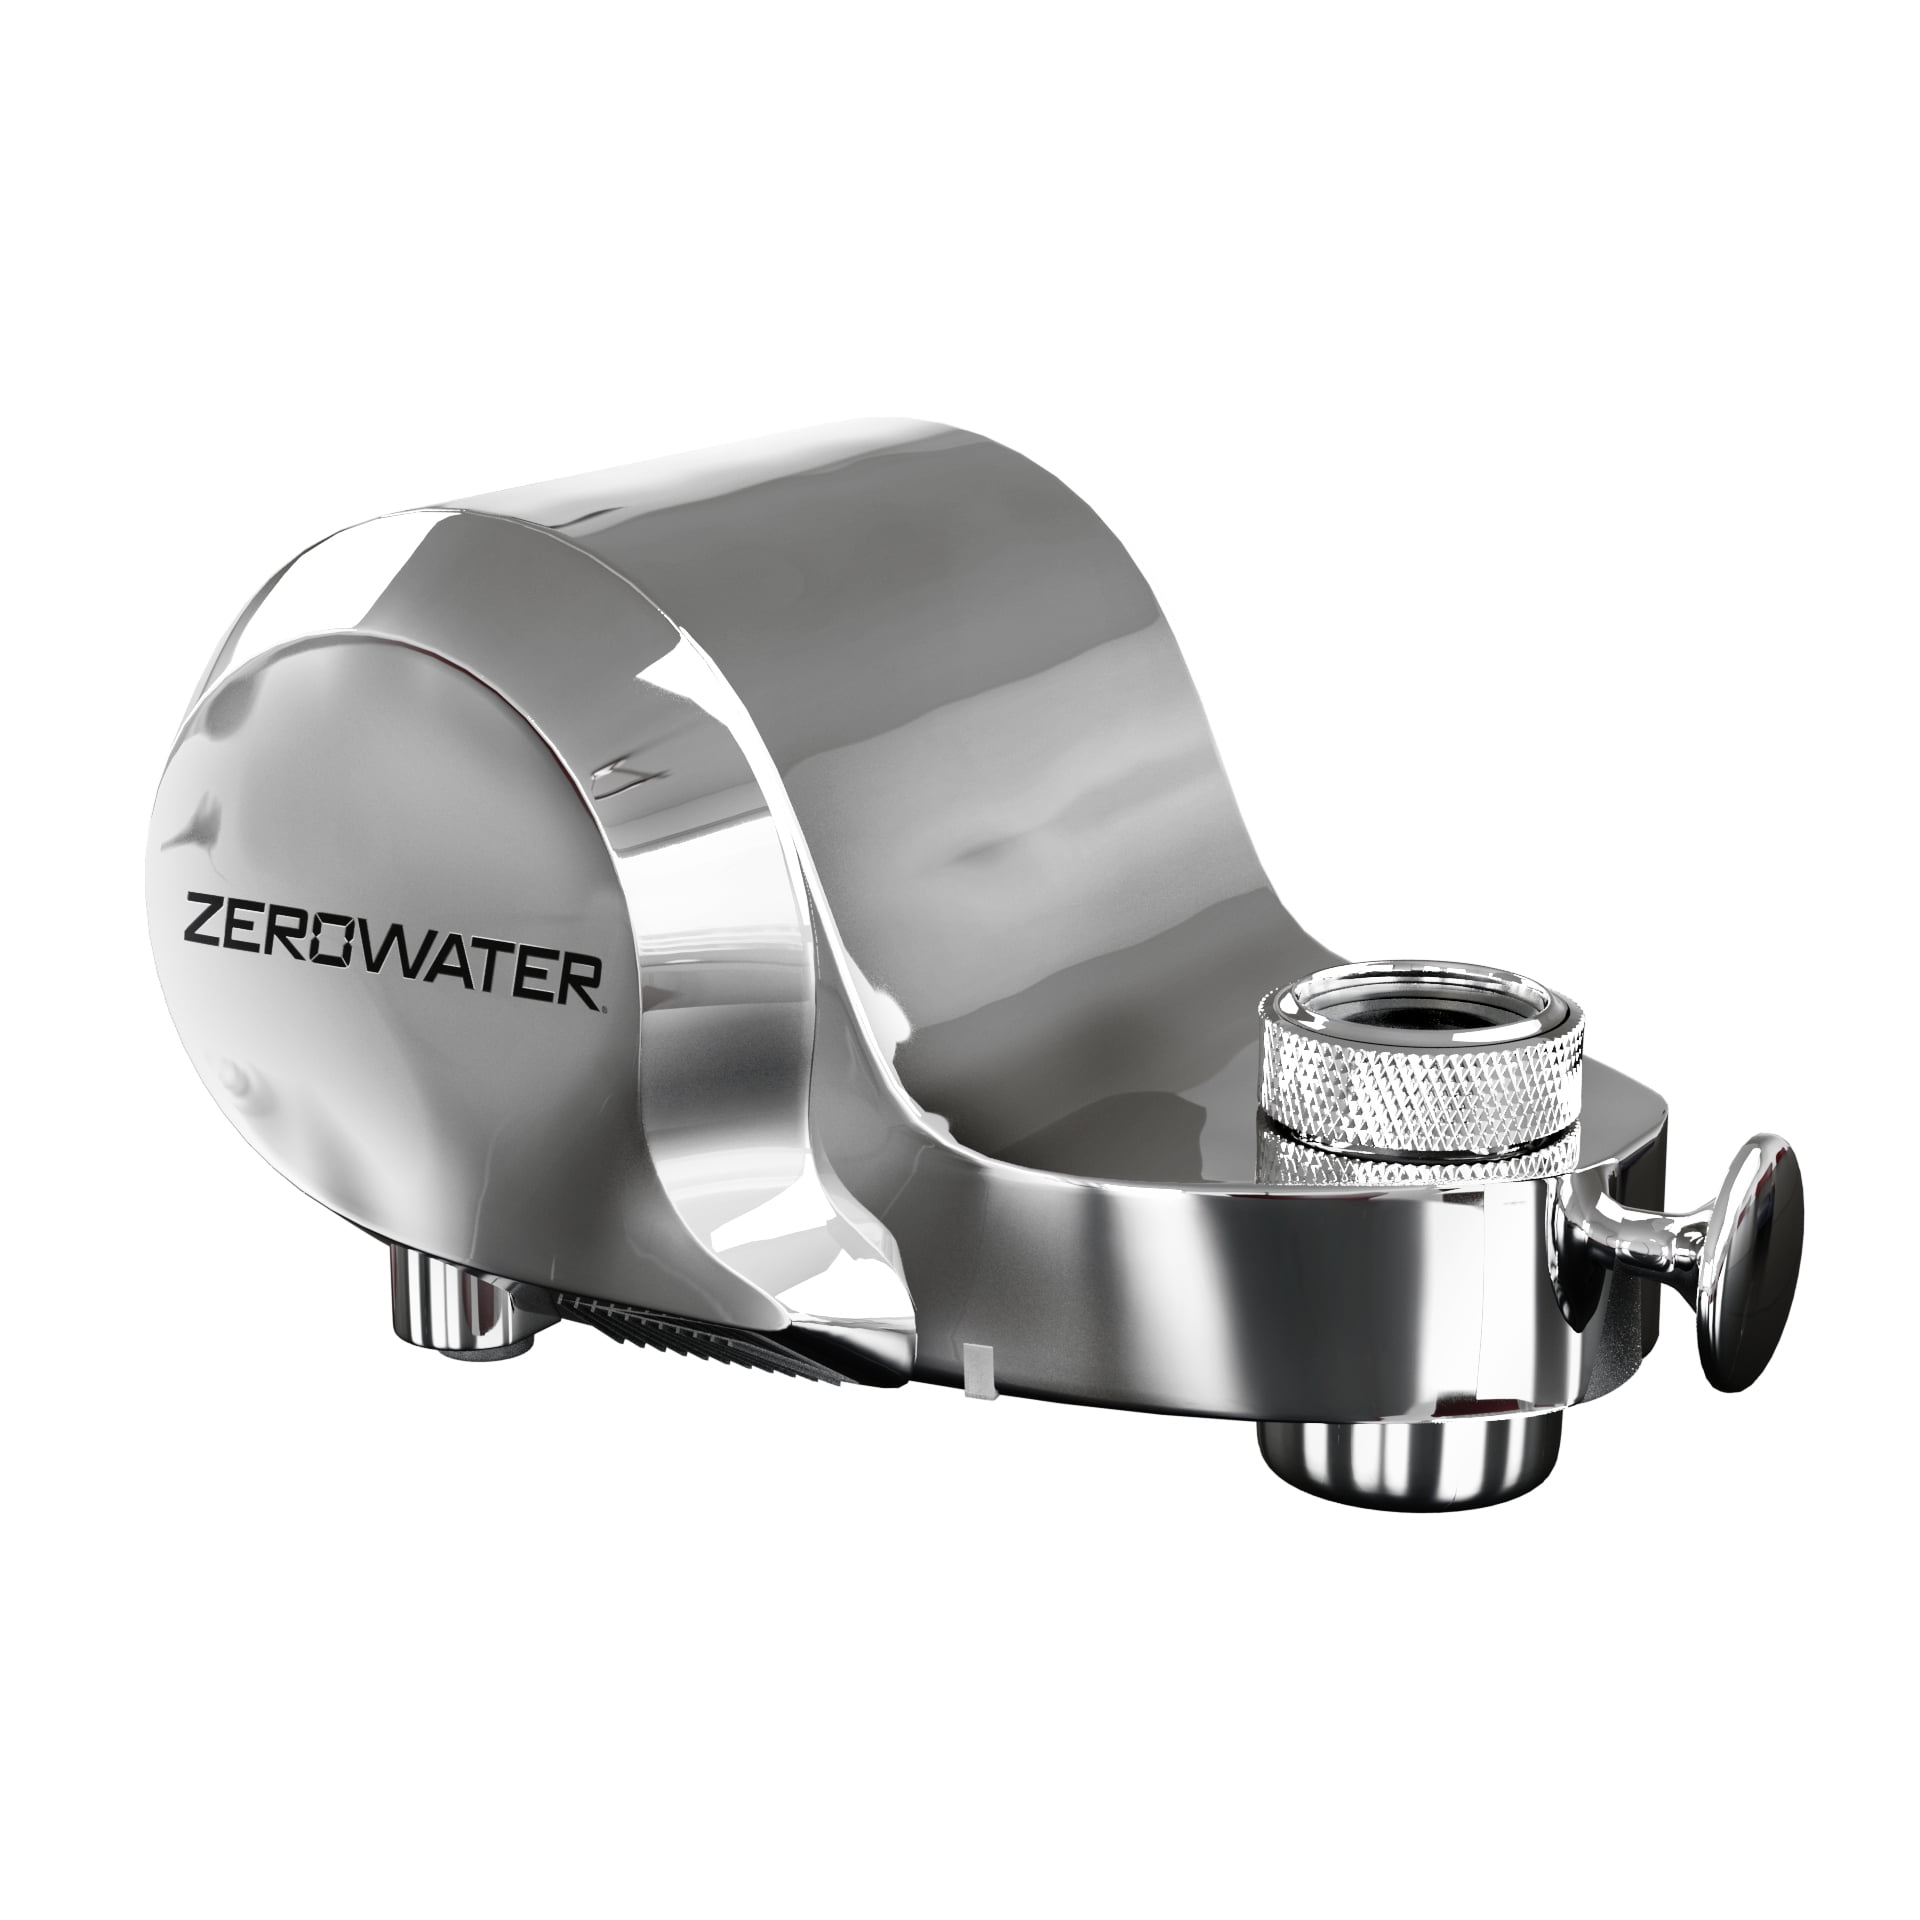 ZeroWater ExtremeLife Faucet Mount Filtration System for Sink, Chrome; Easy Change Eco Filter